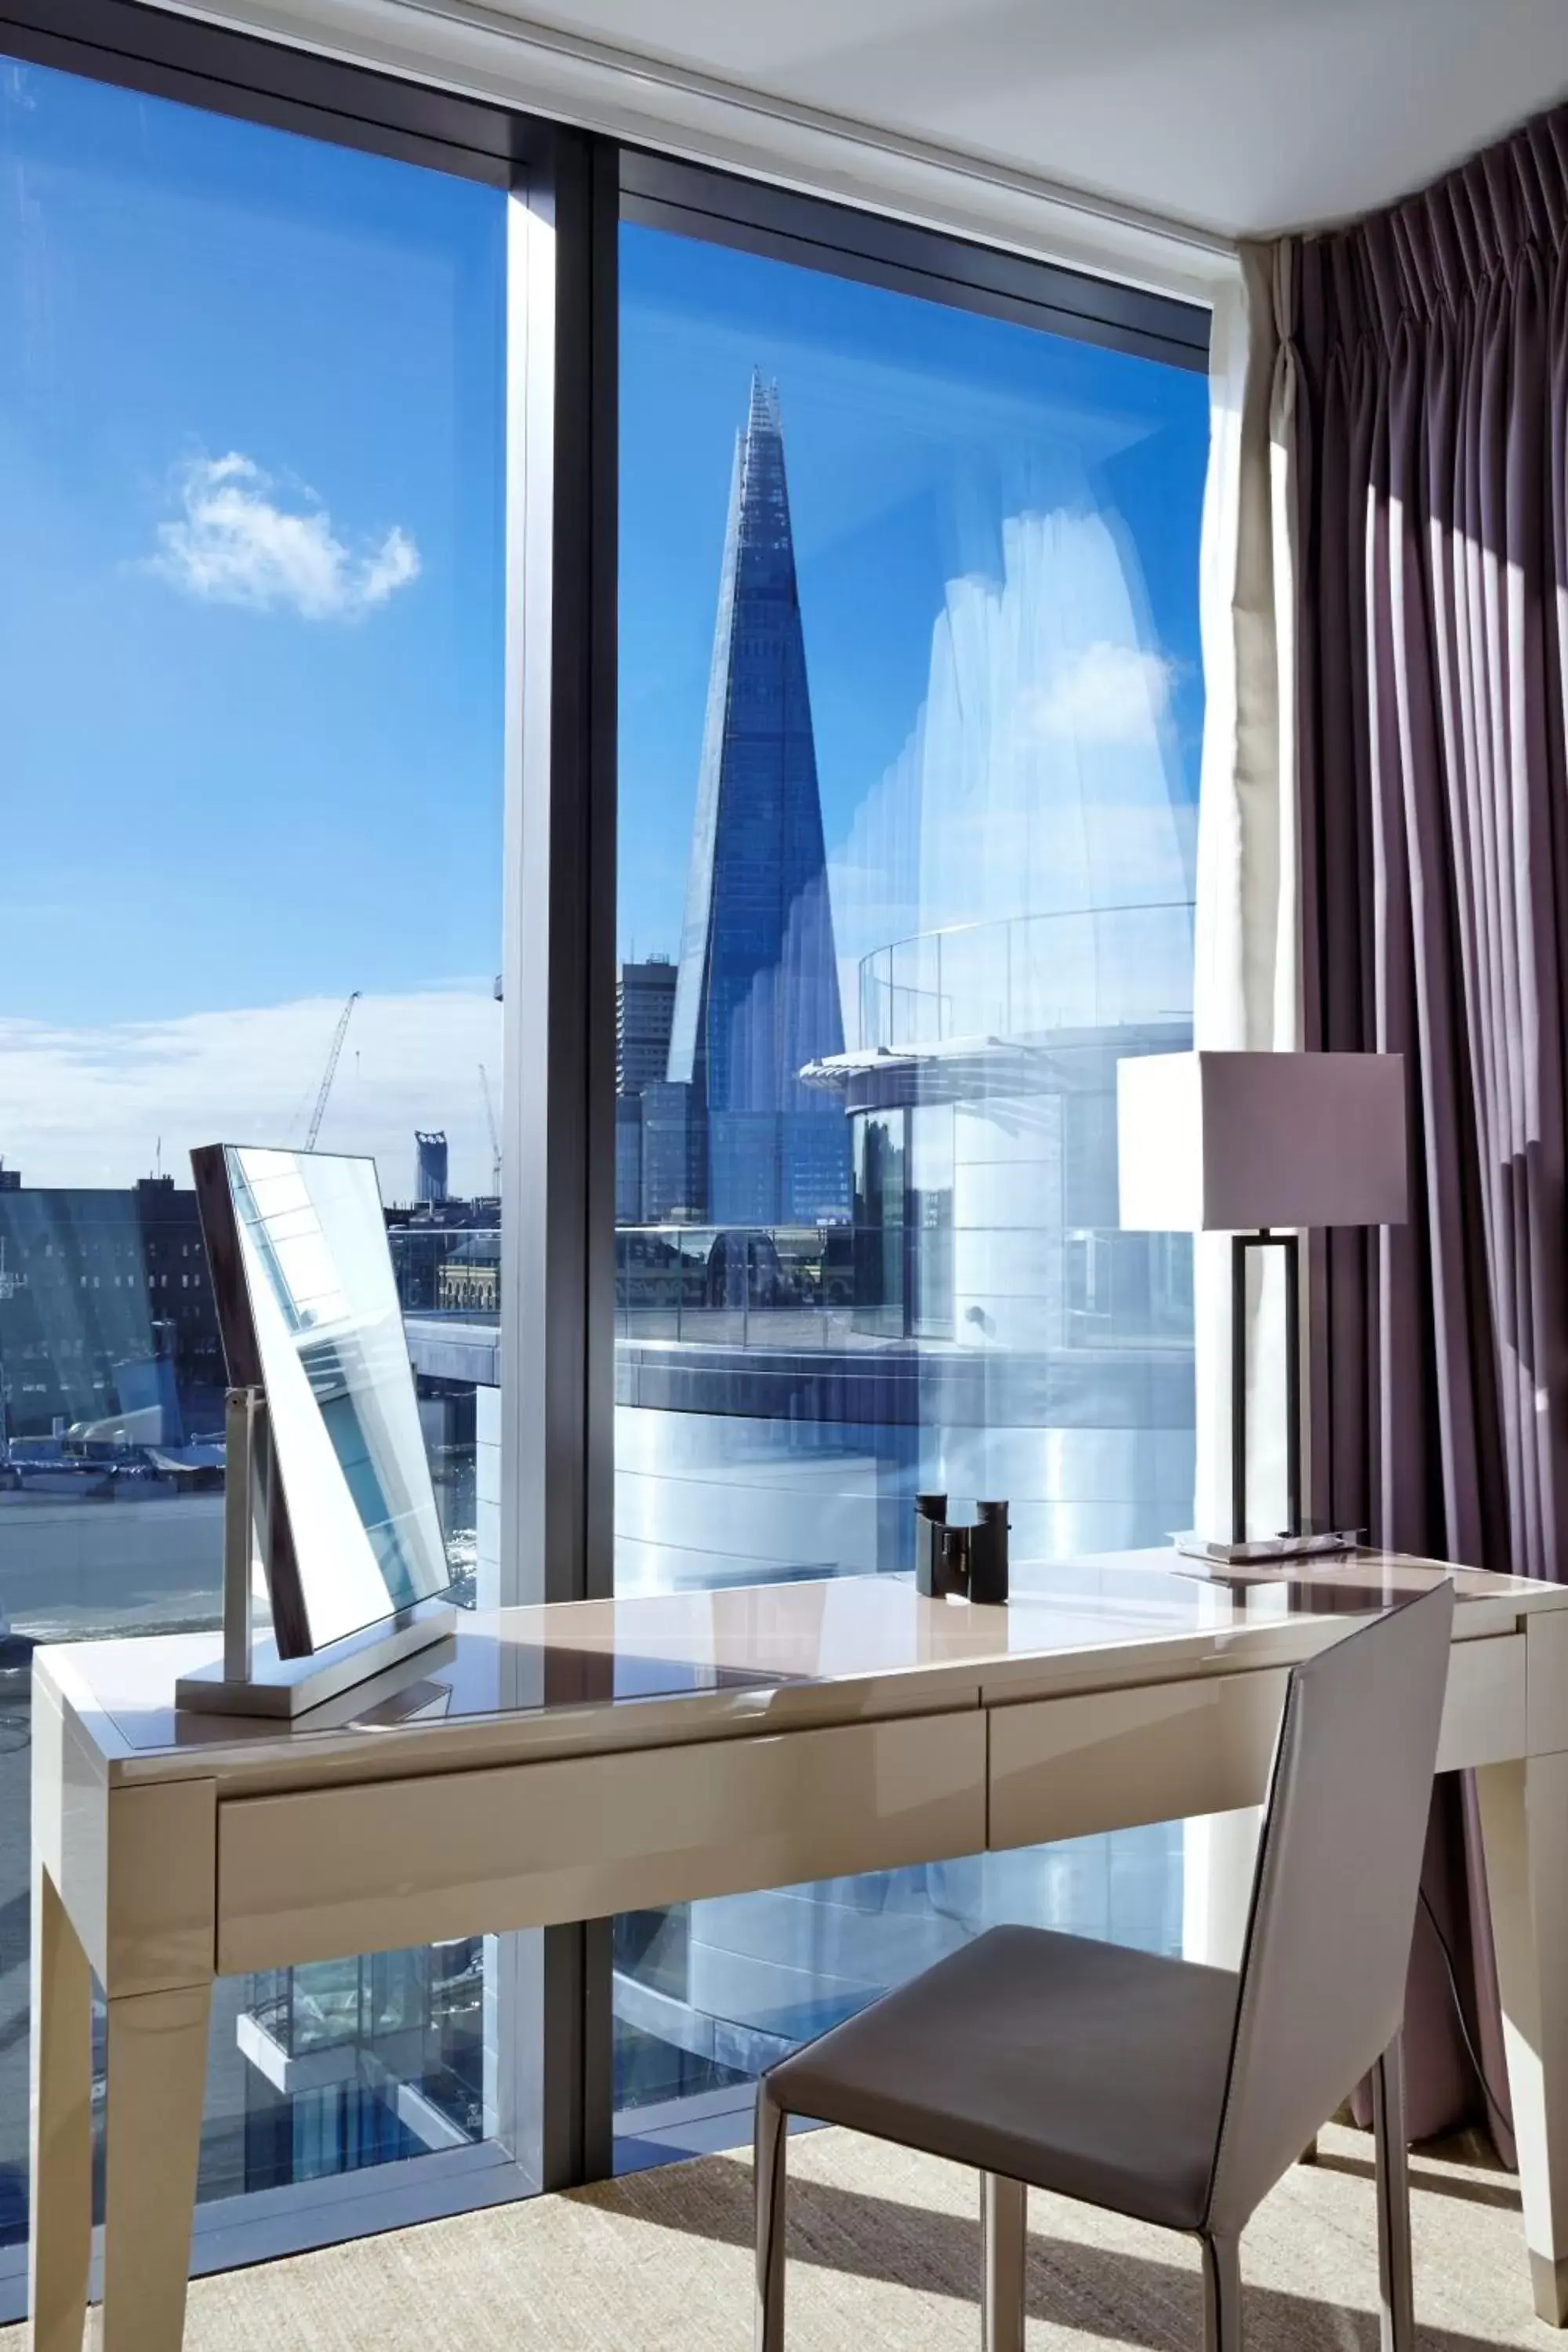 Luxury One-bedroom Apartment with Tower View in Cheval Three Quays at The Tower of London